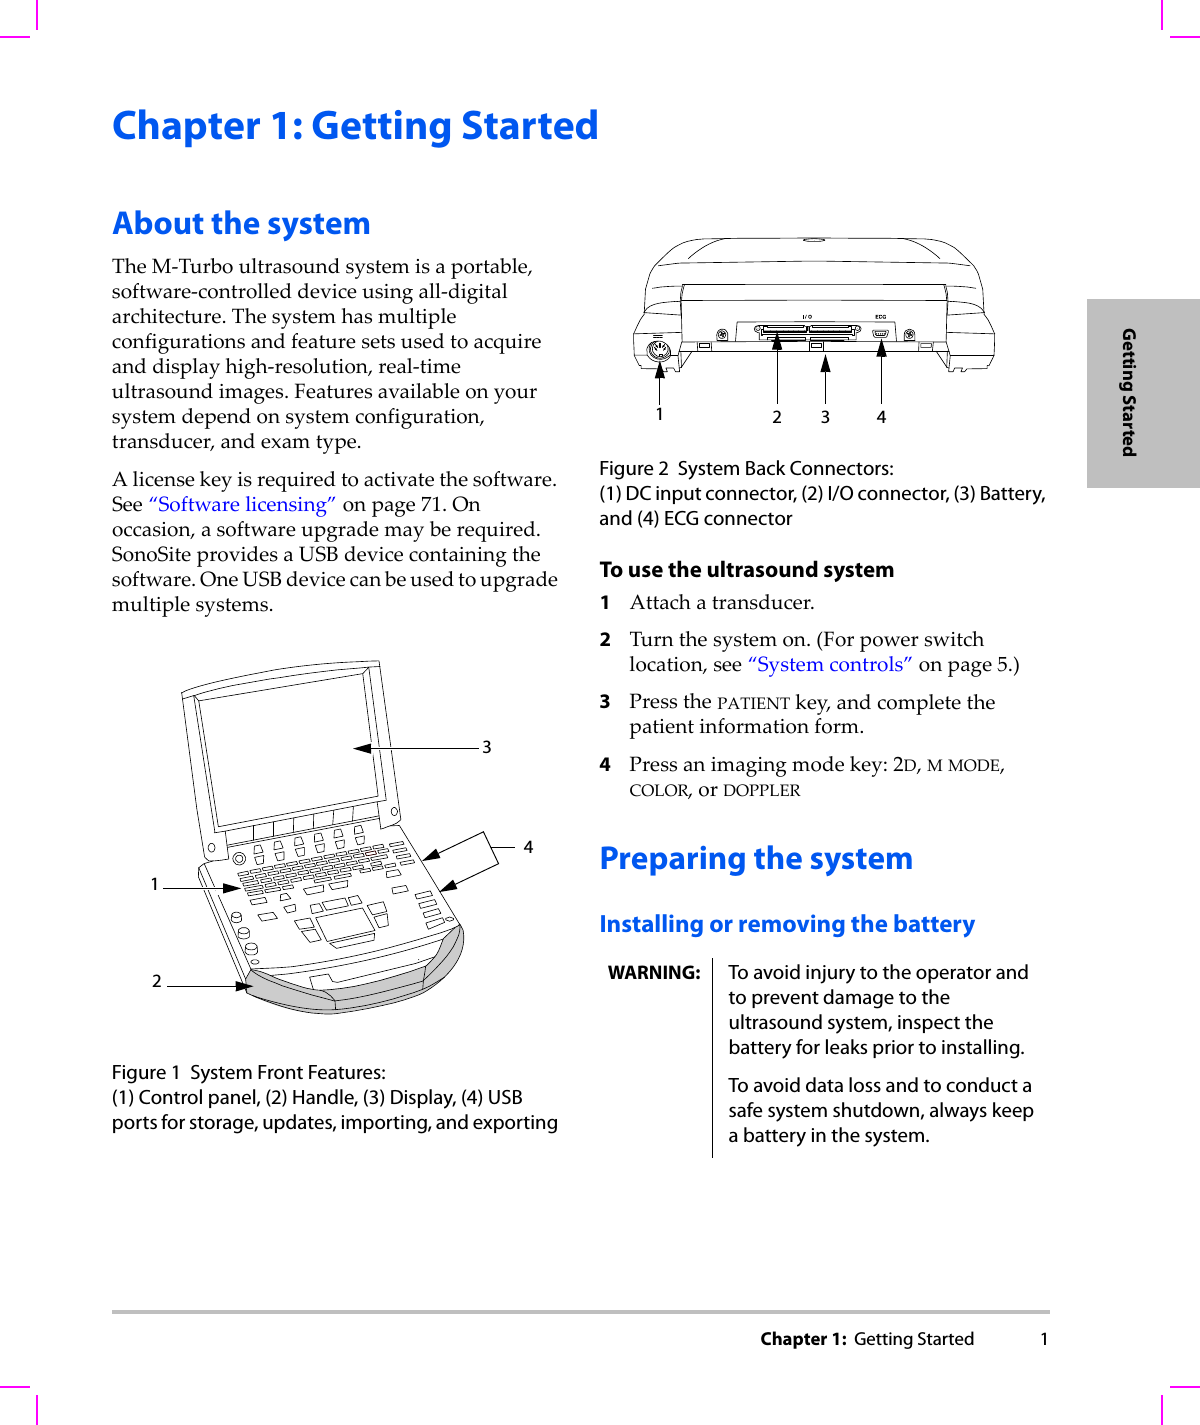 Chapter 1:  Getting Started 1Getting StartedChapter 1: Getting StartedAbout the systemTheM‐Turboultrasoundsystemisaportable,software‐controlleddeviceusingall‐digitalarchitecture.Thesystemhasmultipleconfigurationsandfeaturesetsusedtoacquireanddisplayhigh‐resolution,real‐timeultrasoundimages.Featuresavailableonyoursystemdependonsystemconfiguration,transducer,andexamtype.Alicensekeyisrequiredtoactivatethesoftware.See“Softwarelicensing”onpage 71.Onoccasion,asoftwareupgrademayberequired.SonoSiteprovidesaUSBdevicecontainingthesoftware.OneUSBdevicecanbeusedtoupgrademultiplesystems.Figure 1 System Front Features: (1) Control panel, (2) Handle, (3) Display, (4) USB ports for storage, updates, importing, and exporting Figure 2 System Back Connectors:(1) DC input connector, (2) I/O connector, (3) Battery, and (4) ECG connectorTo use the ultrasound system1Attachatransducer.2Turnthesystemon.(Forpowerswitchlocation,see“Systemcontrols”onpage 5.)3PressthePATIENTkey,andcompletethepatientinformationform.4Pressanimagingmodekey:2D,MMODE,COLOR,orDOPPLERPreparing the systemInstalling or removing the battery4321WARNING: To avoid injury to the operator and to prevent damage to the ultrasound system, inspect the battery for leaks prior to installing.To avoid data loss and to conduct a safe system shutdown, always keep a battery in the system.23 41